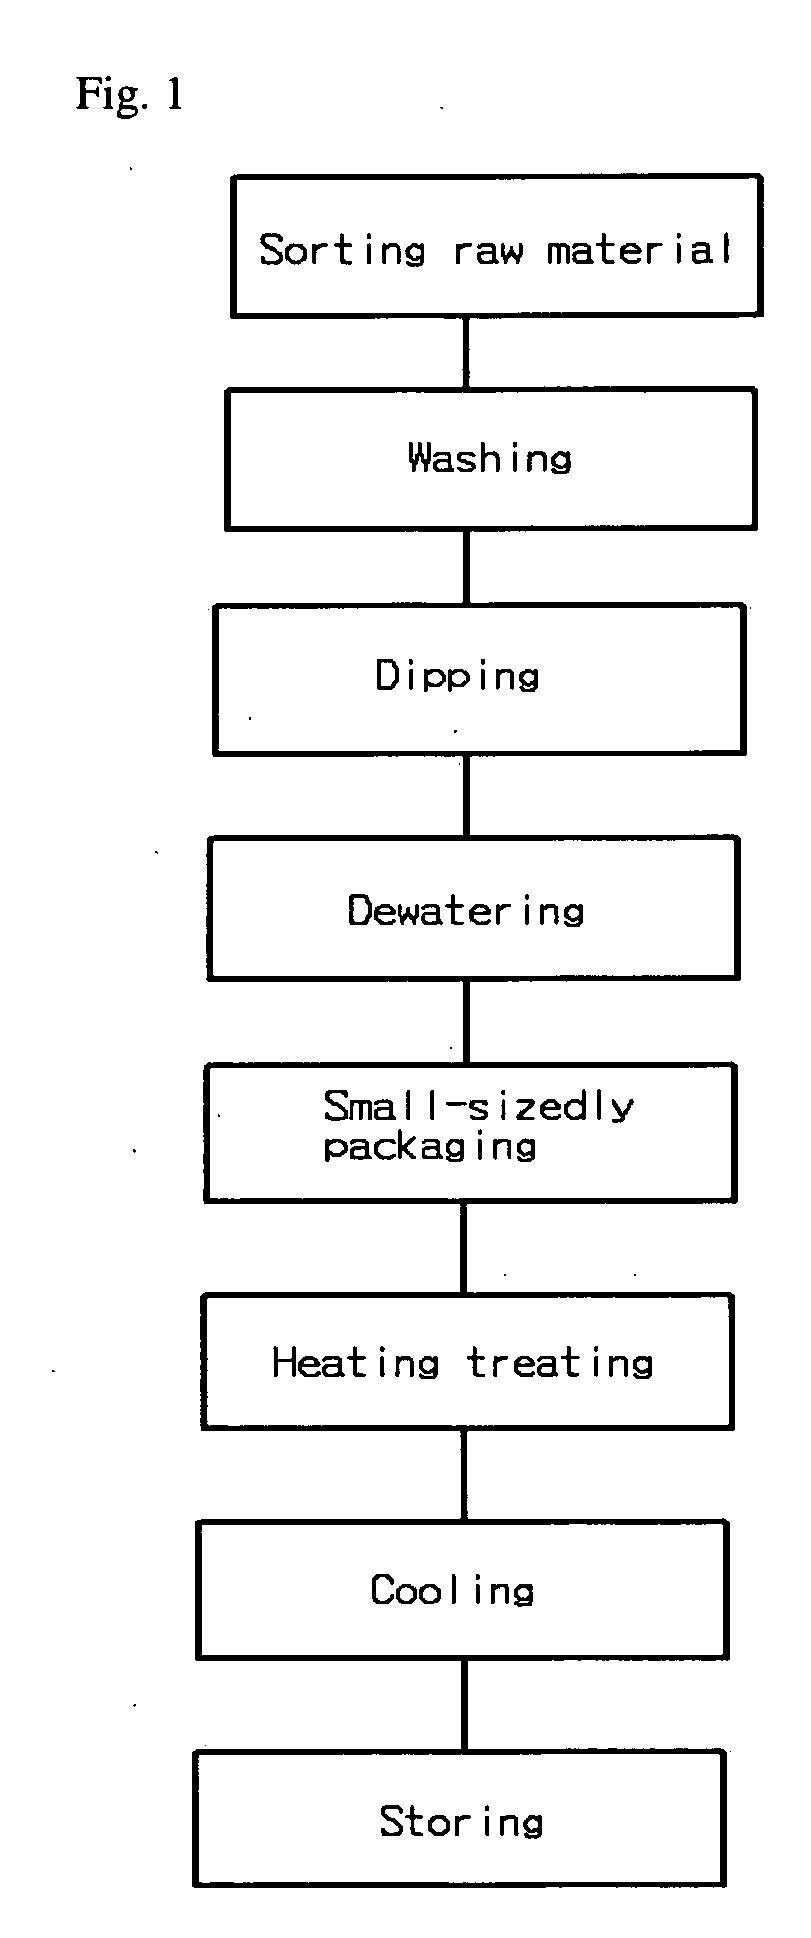 Method of preparing aseptic packaged cooked rice with black bean in aseptic packing system